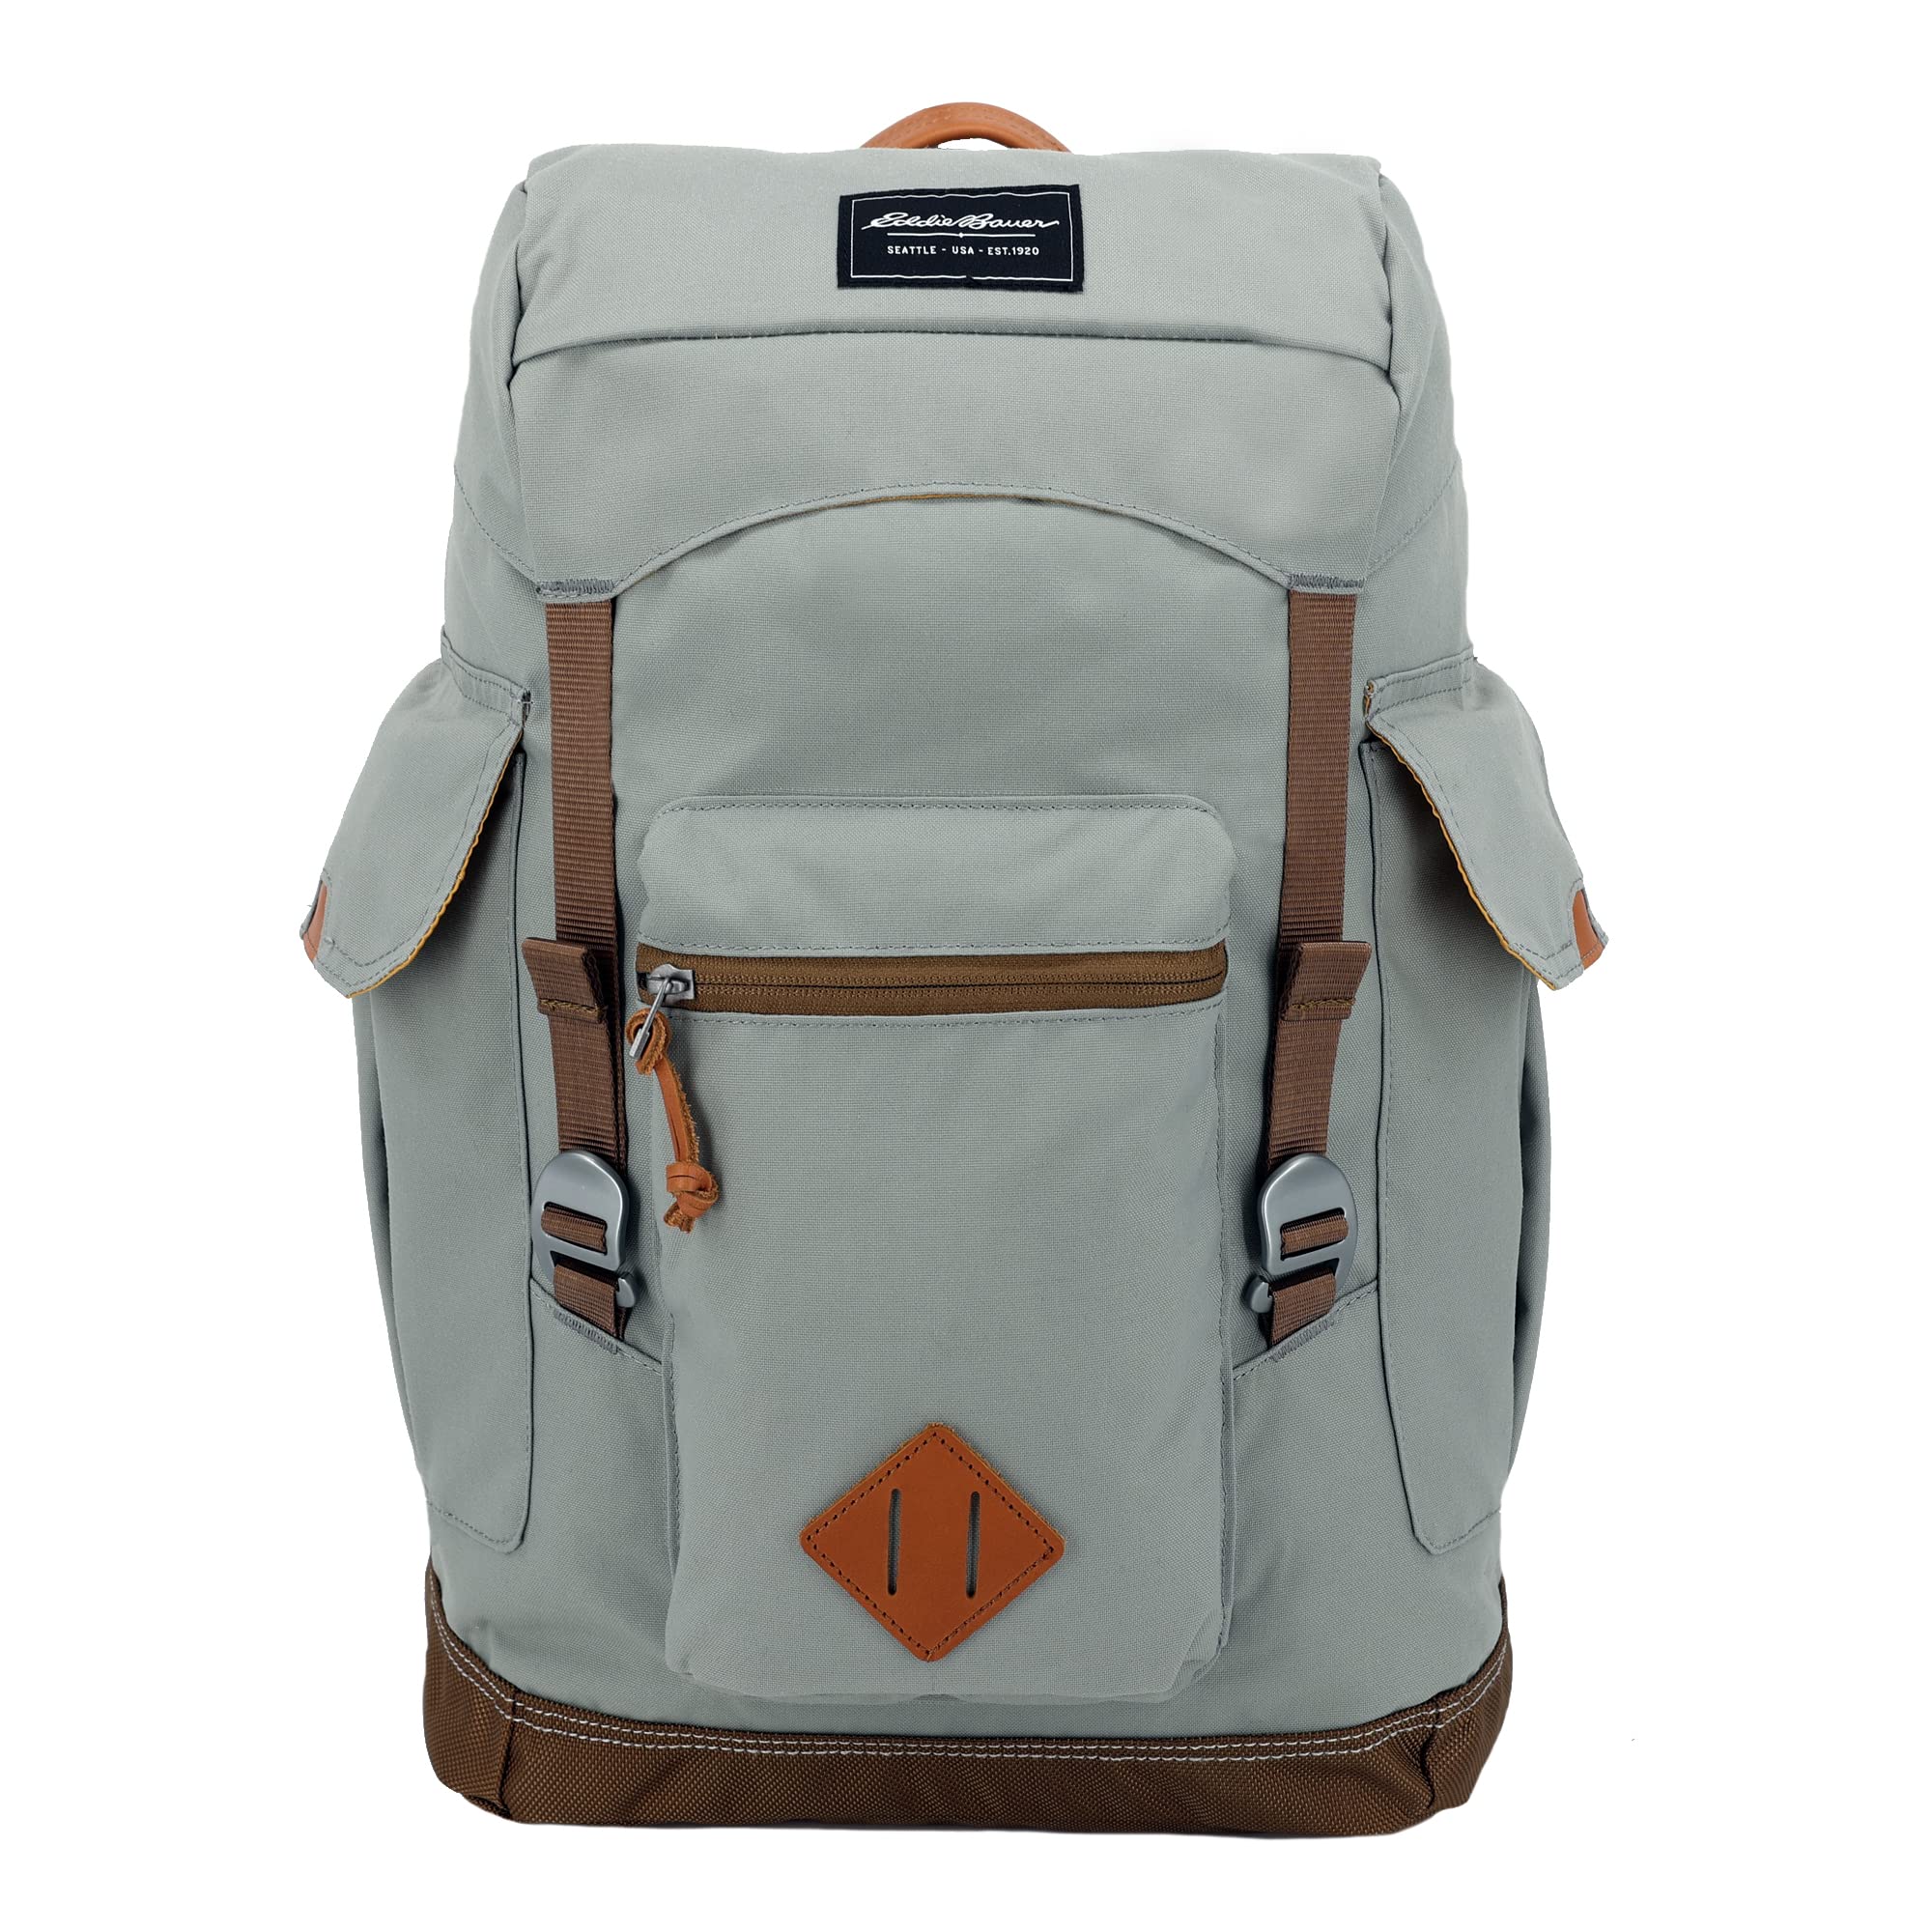 Eddie Bauer Bygone Backpack with Exterior Pockets and Laptop Compatible Sleeve (Multiple Sizes Available), Light Heather Grey, 25L